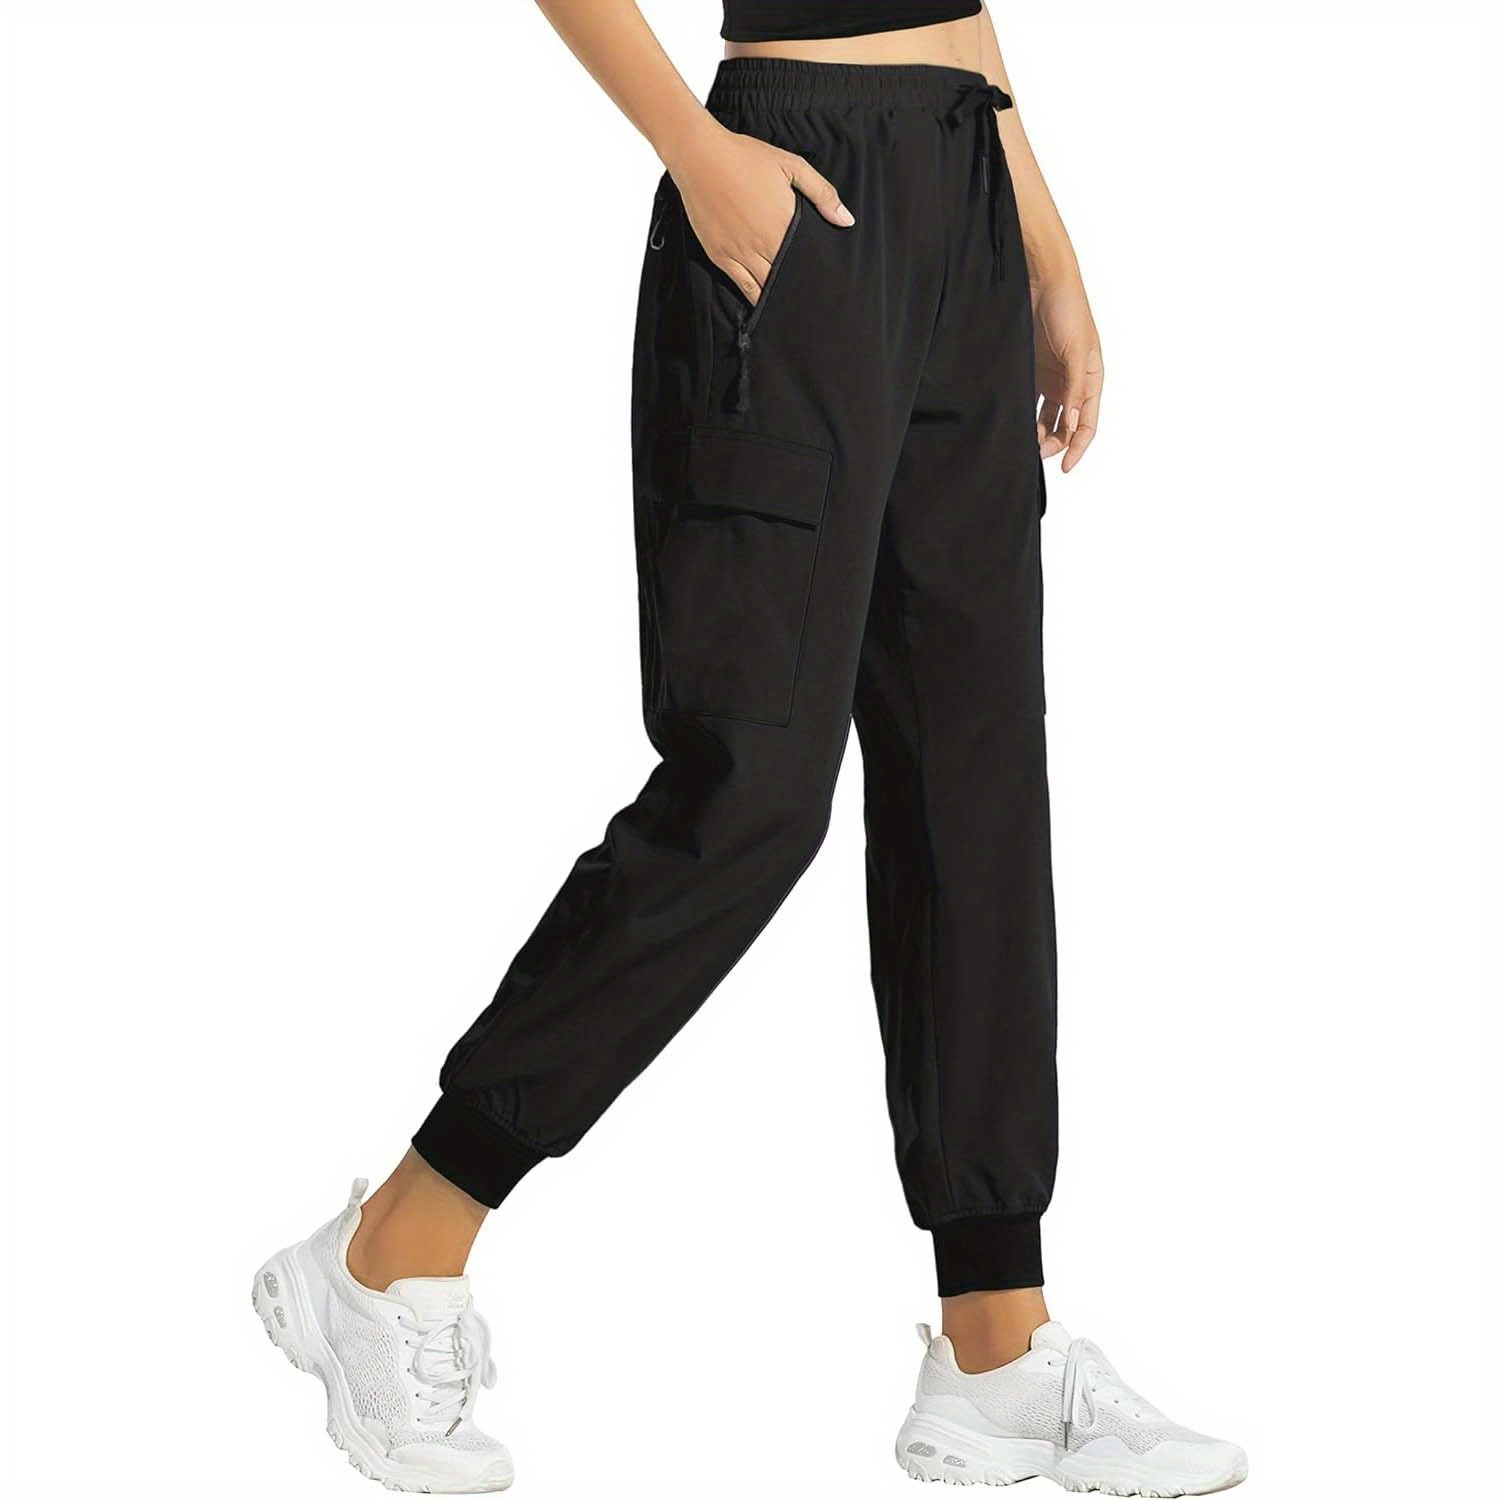 

Lightweight Cargo Joggers For Women, Hiking Pants Women With Zipper Pockets Casual Travel Quick Dry Fabric